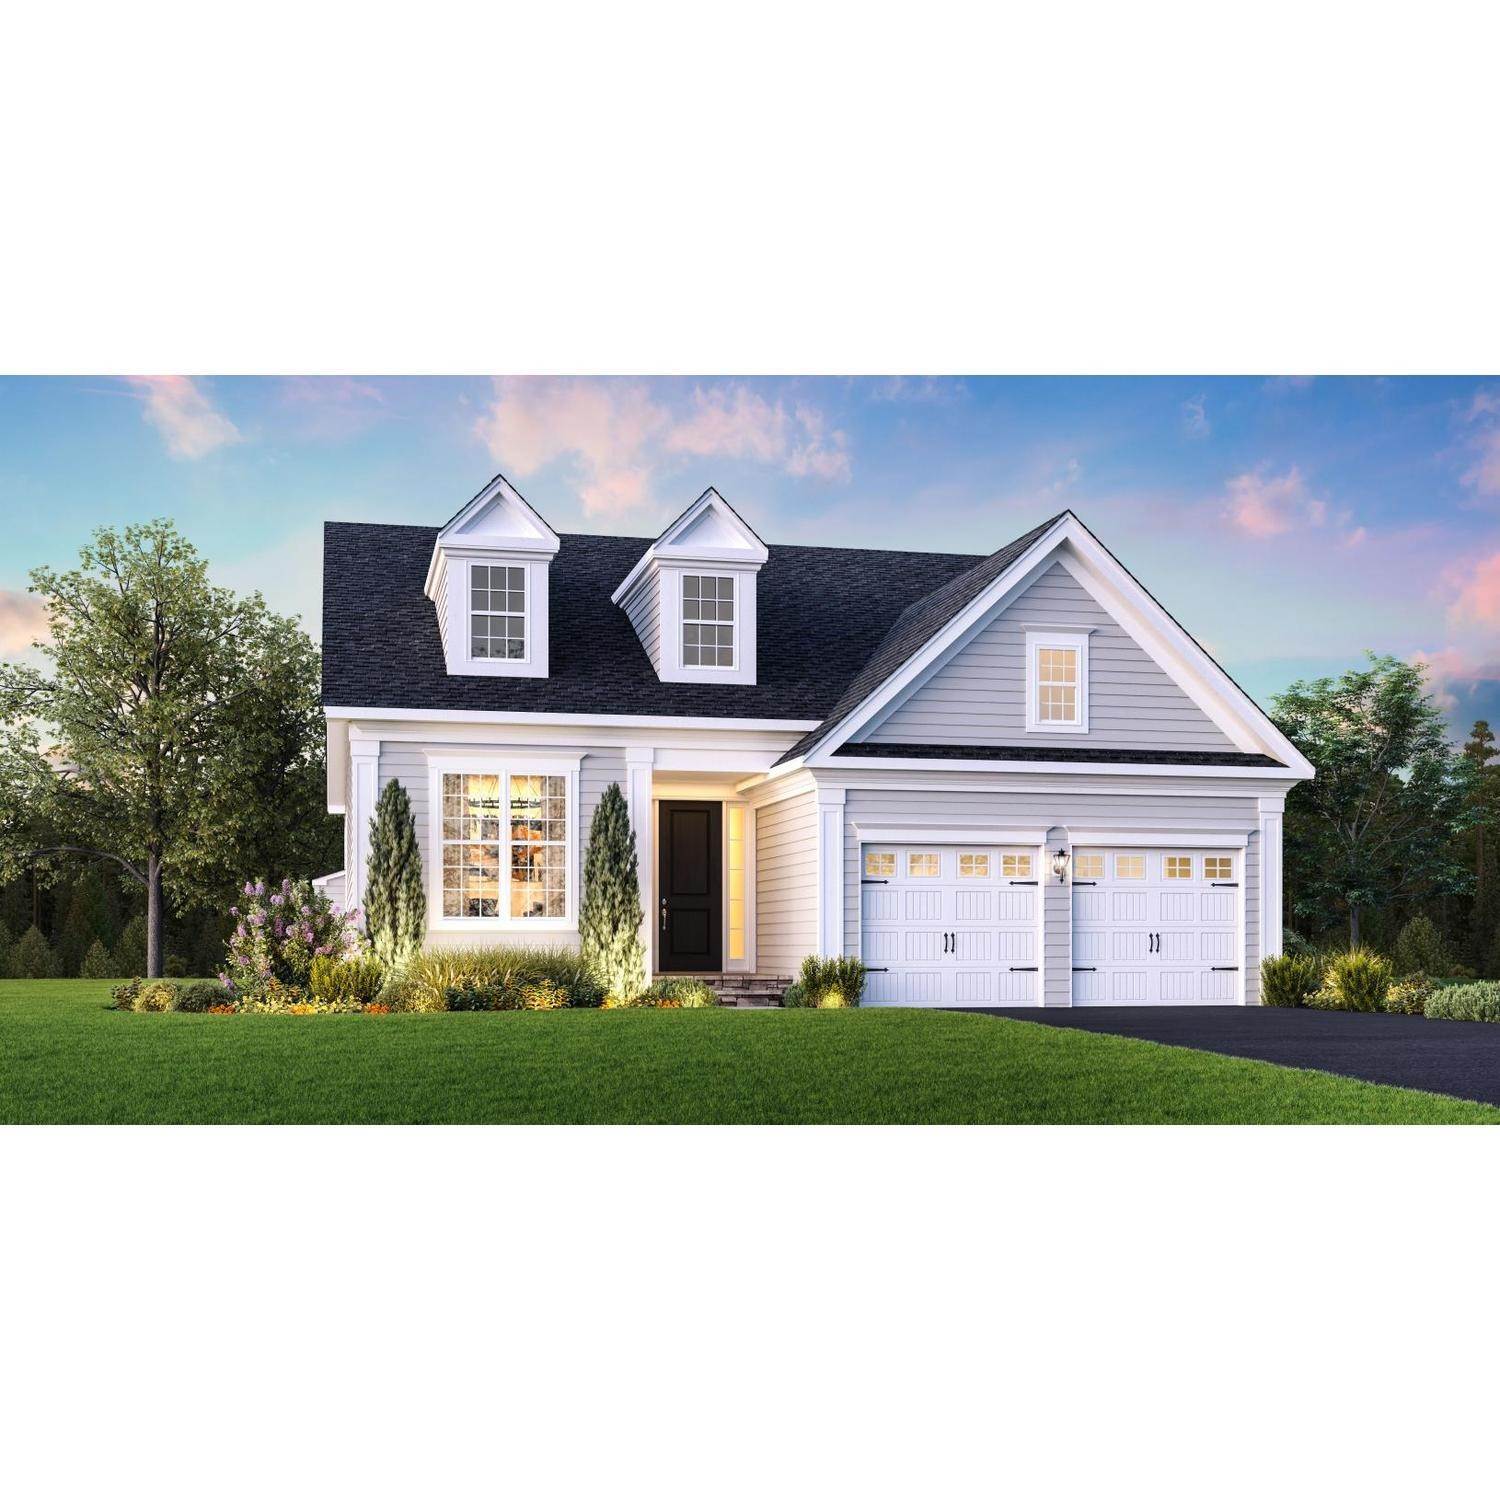 Single Family for Sale at Tyngsborough, MA 01879